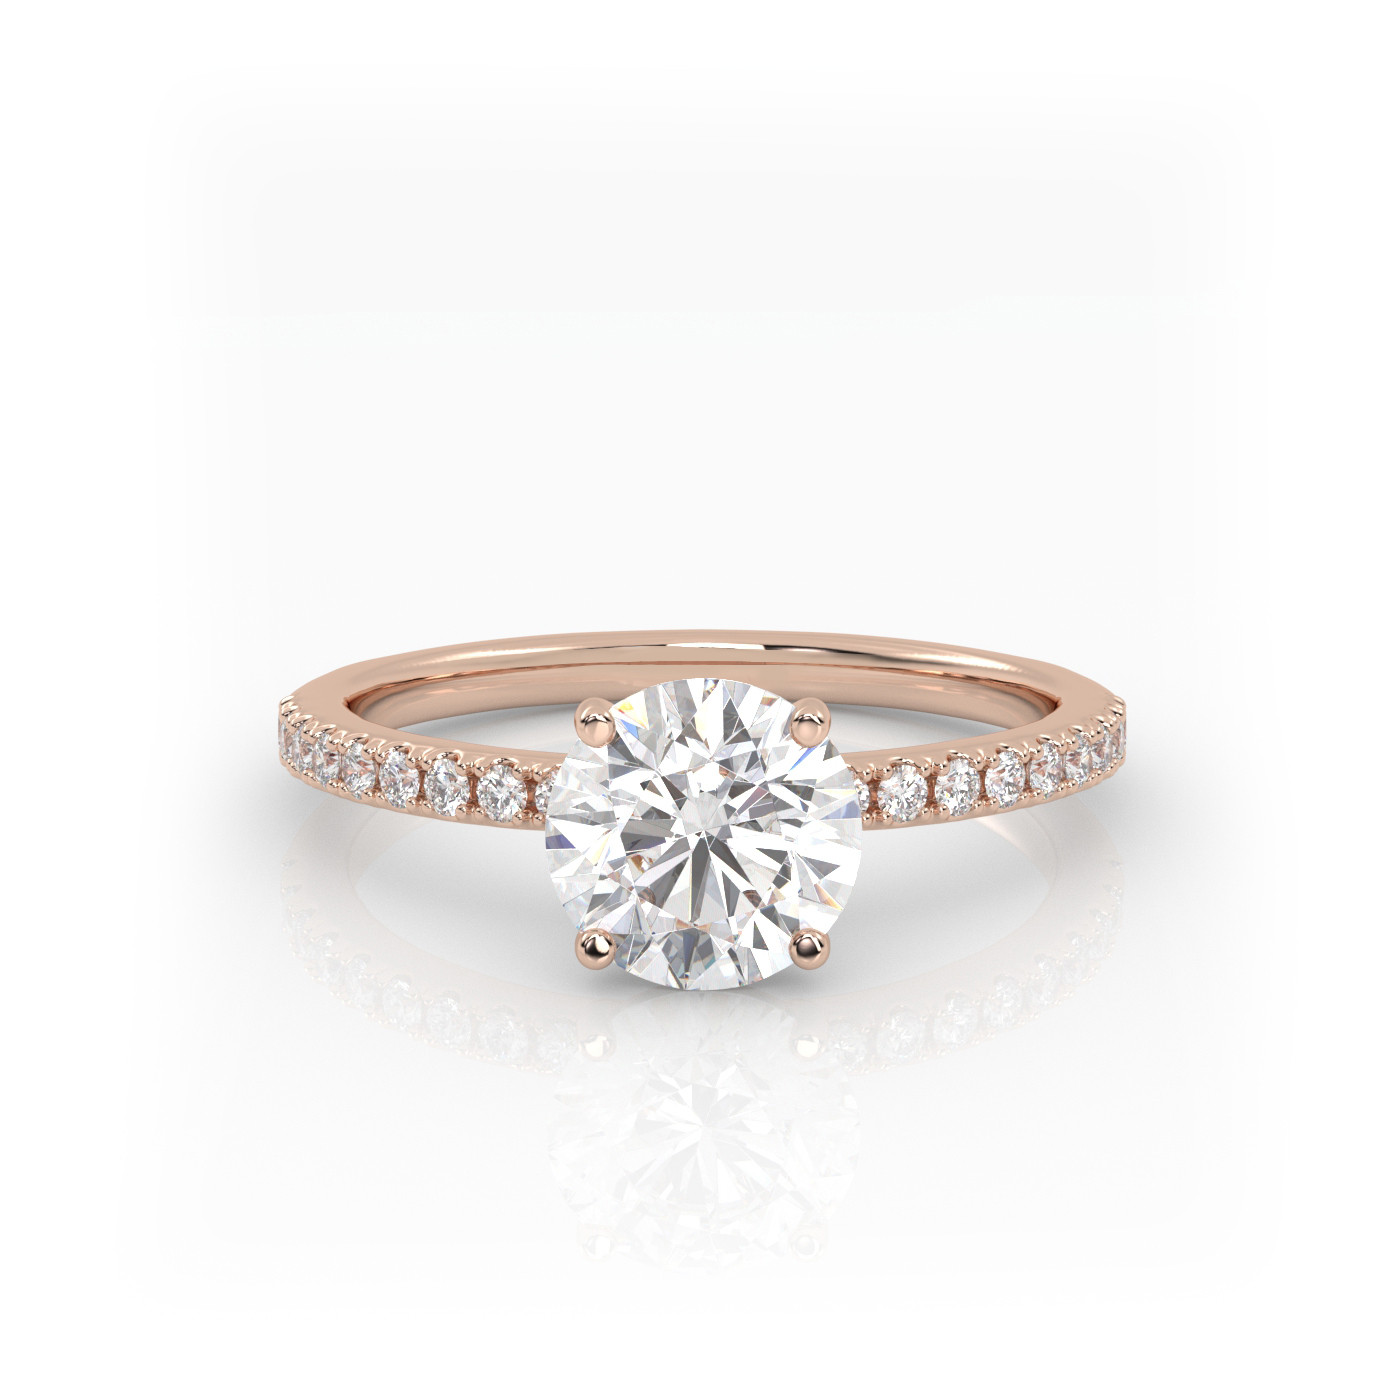 18K ROSE GOLD Round Diamond Cut Solitaire Engagement Ring with Pave Band